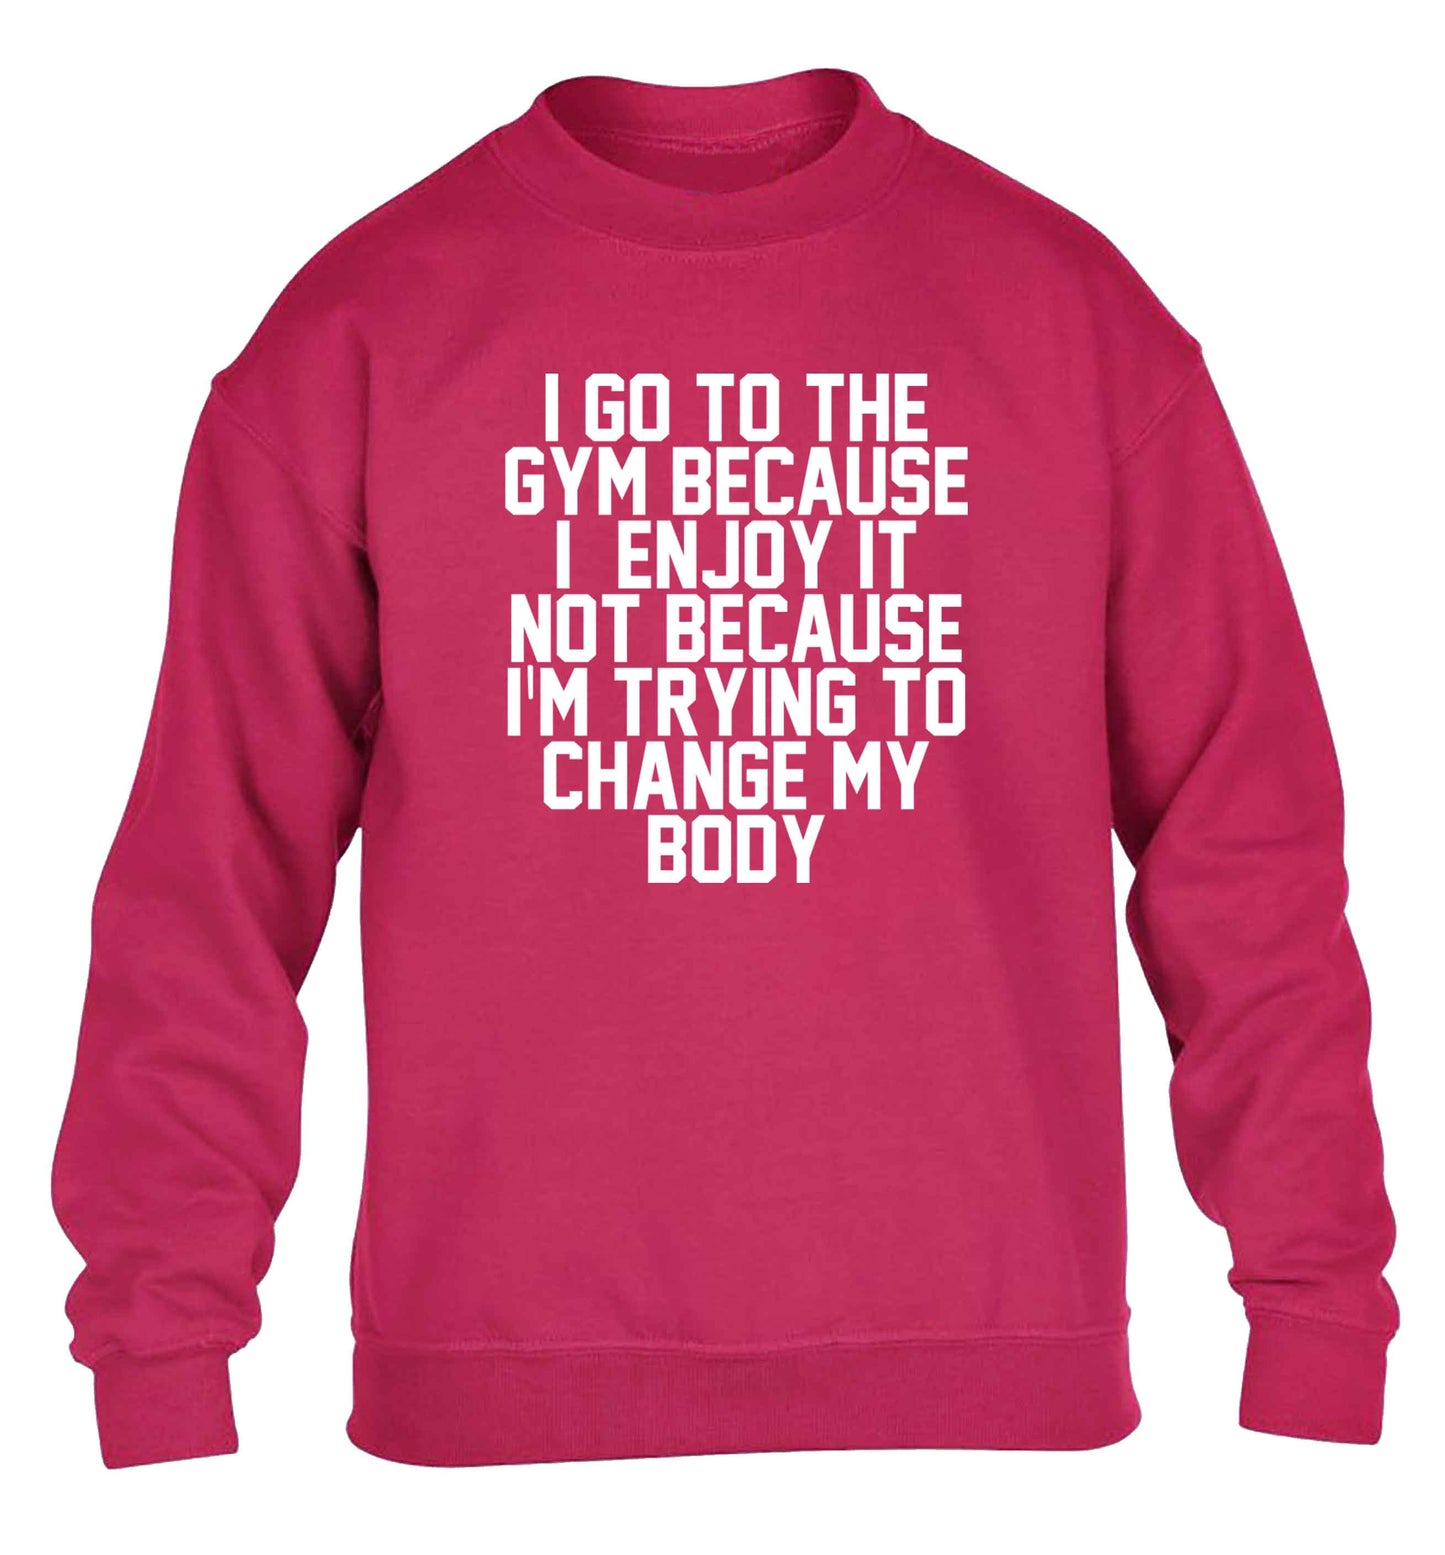 I go to the gym because I enjoy it not because I'm trying to change my body children's pink sweater 12-13 Years